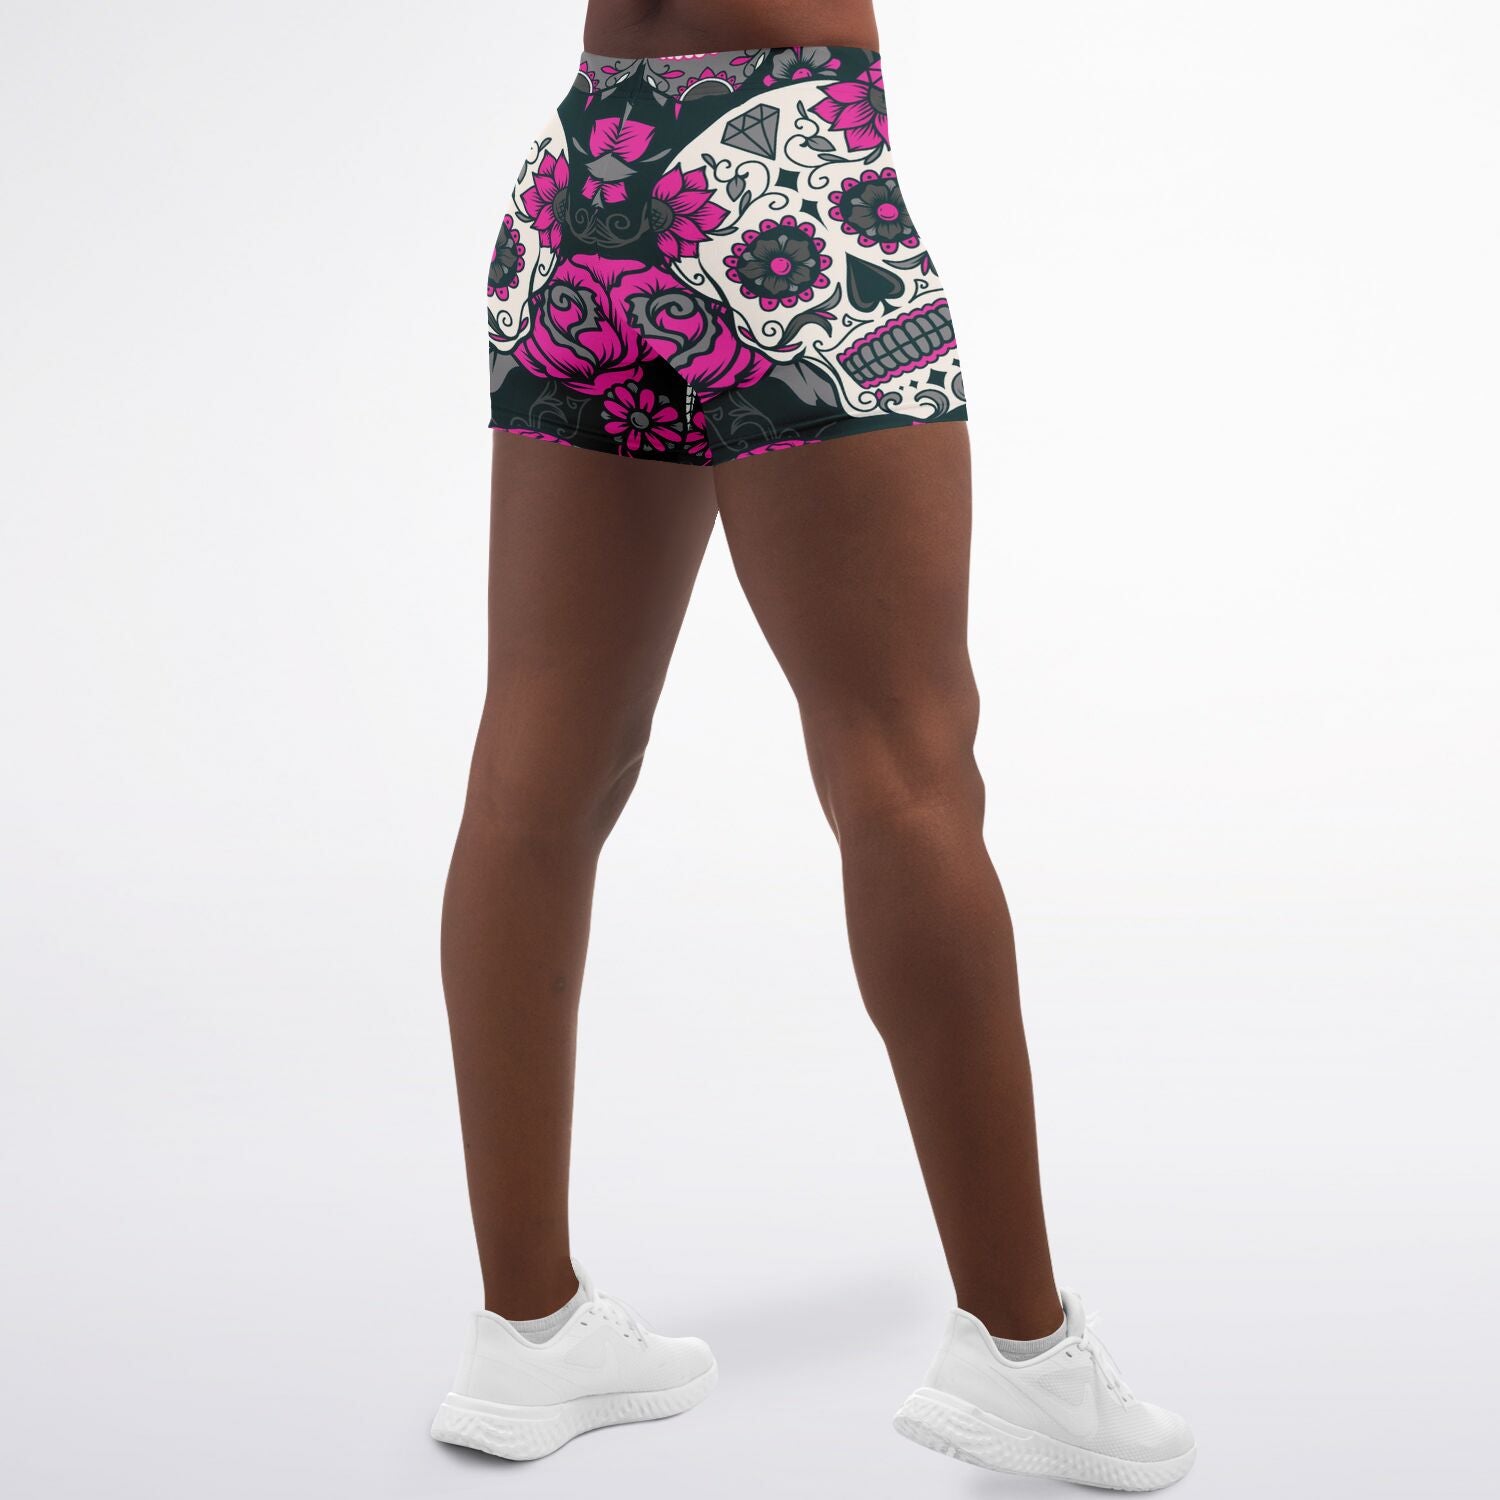 Women's Mid-rise Pink Day of the Dead Sugar Skulls Halloween Athletic Booty Shorts